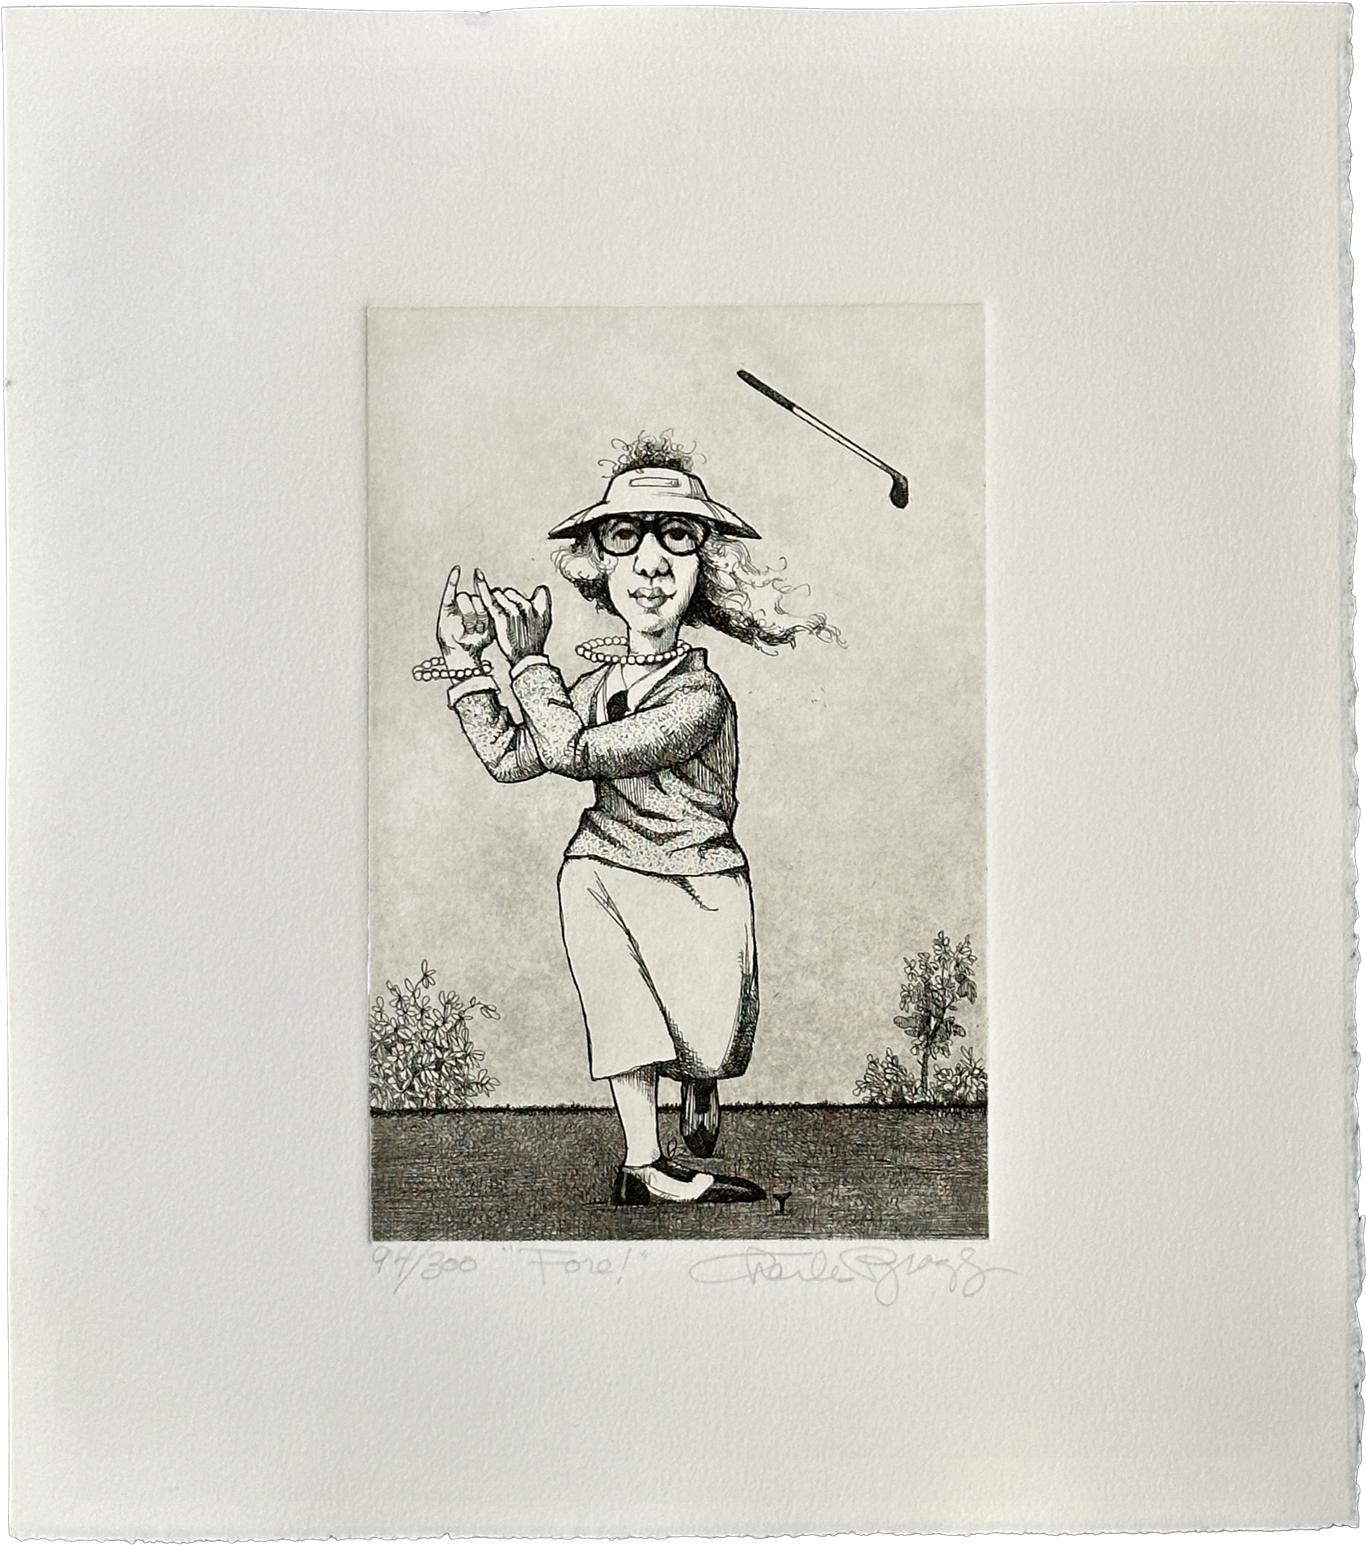 Charles Bragg Figurative Print - Women In Golf : Fore! 1988 Signed Limited Edition Art Etching